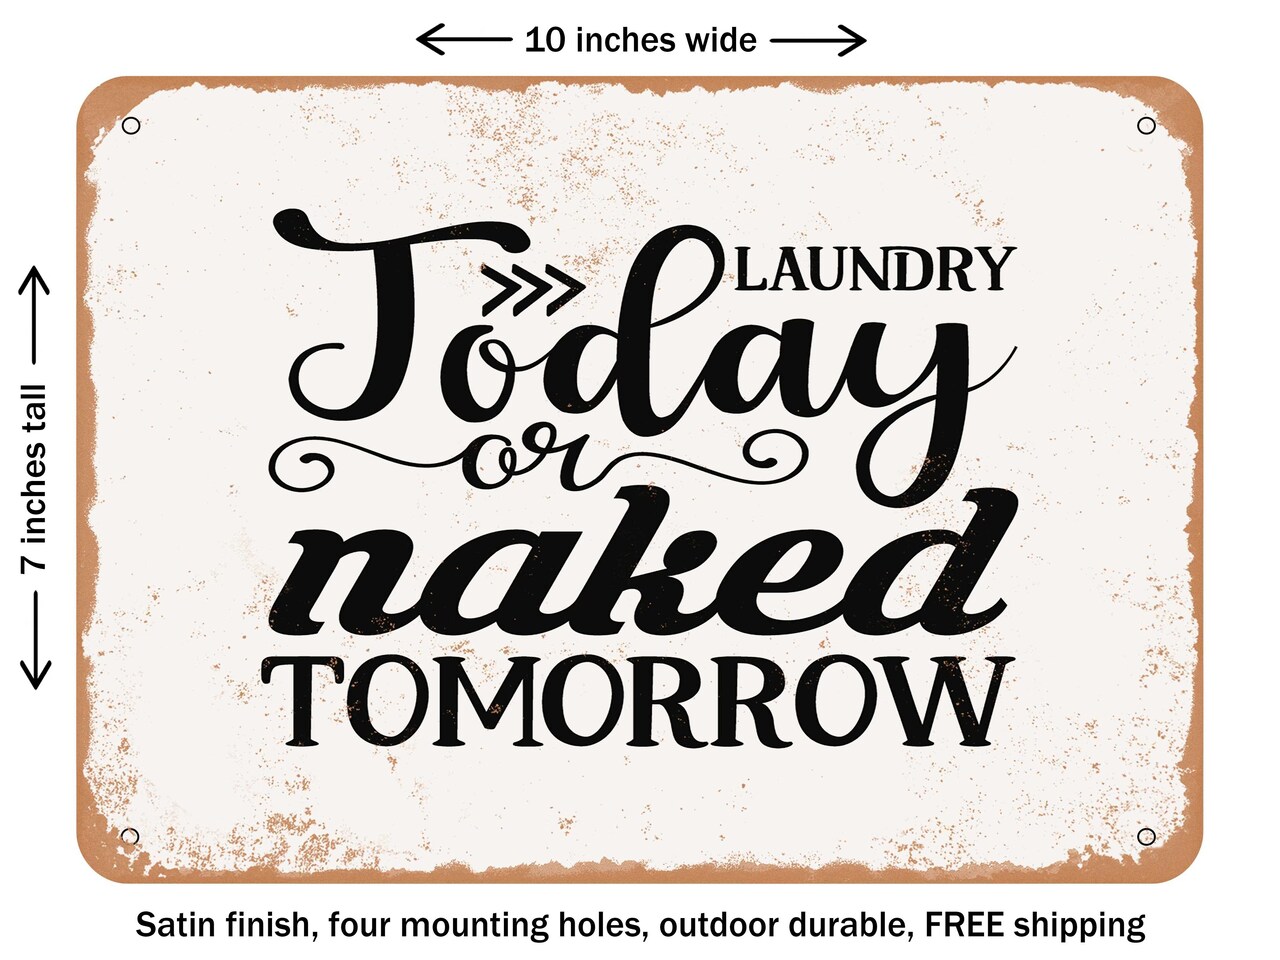 DECORATIVE METAL SIGN - Laundry today or Naked tomorrow - Vintage Rusty Look